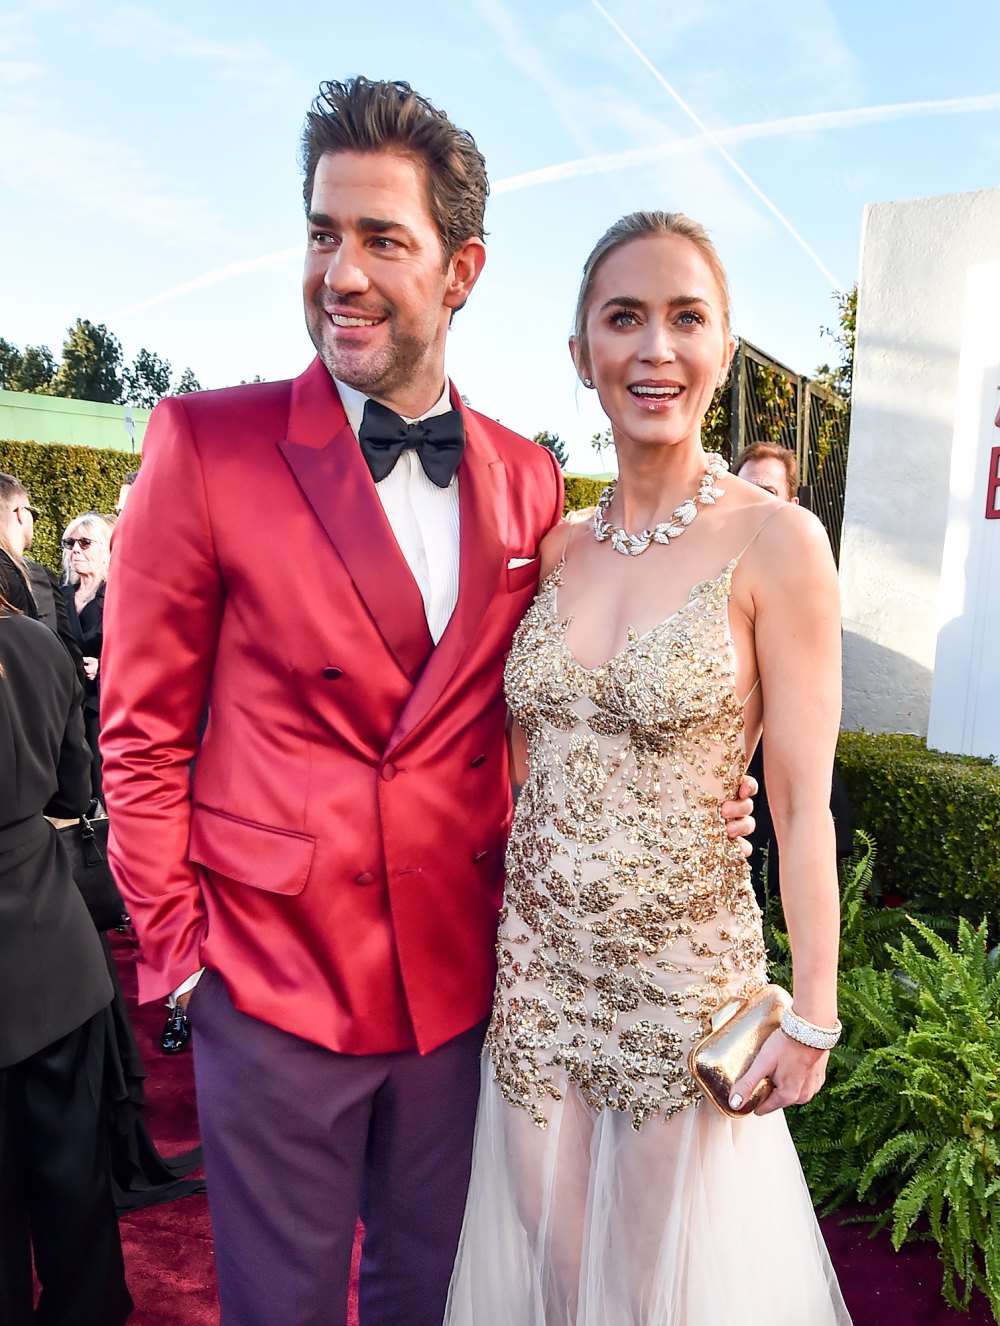 Emily Blunt and John Krasinski Are Not Having 'Issues' or Discussing Getting a Divorce: Source